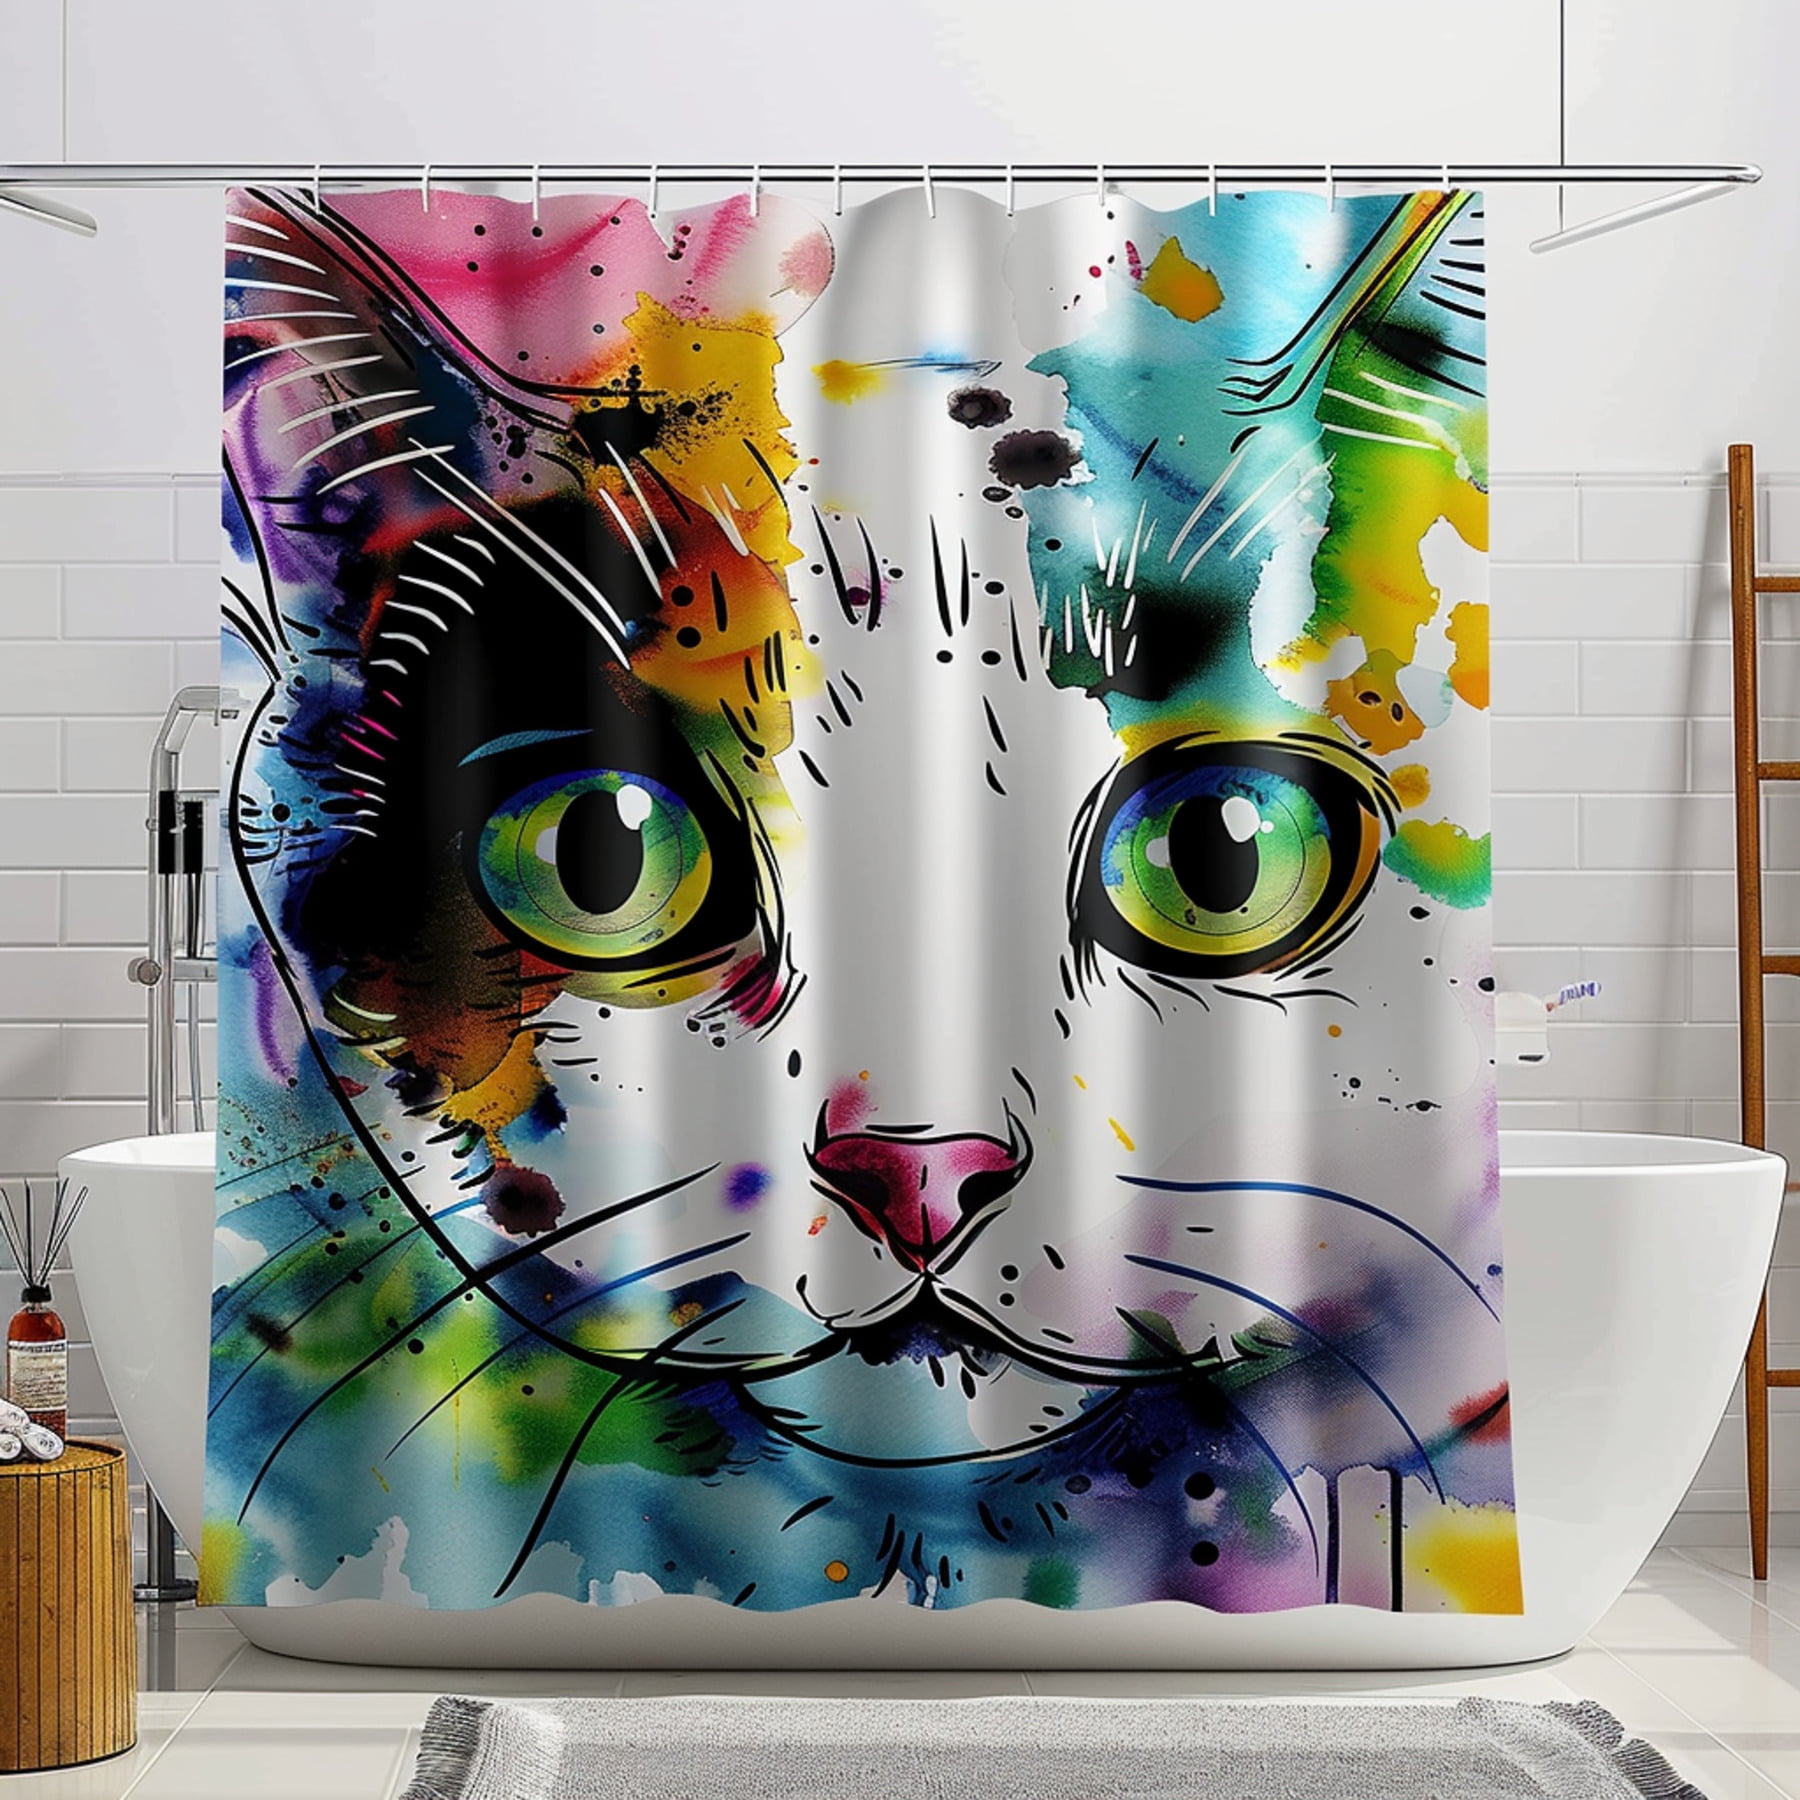 Transform your bathroom into a vibrant masterpiece with our eyecatching ...